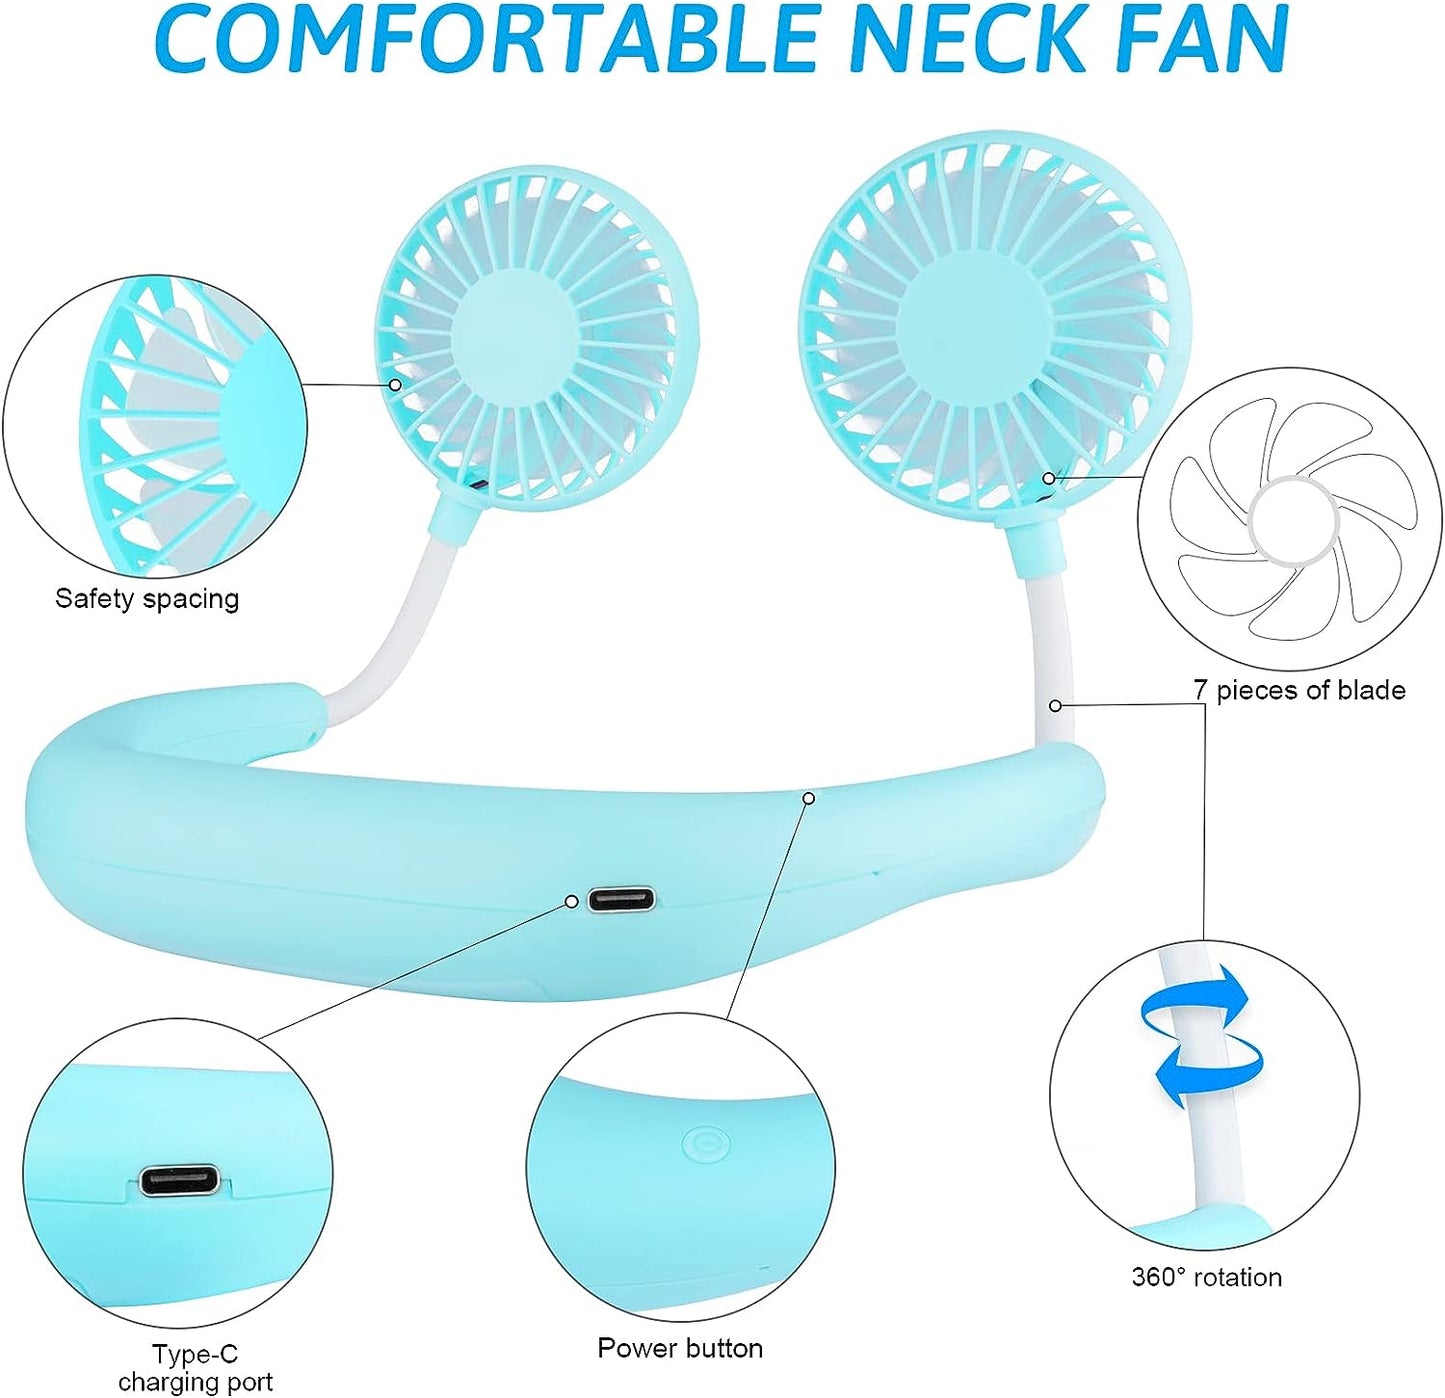 JIAHAIYU Neck Fan Portable Face Fan Personal USB Hands-Free Mini Wearable Sports Handheld Cooling Small New Fans Around Your Neck for Travel Office Room Household Outdoor, 300*190